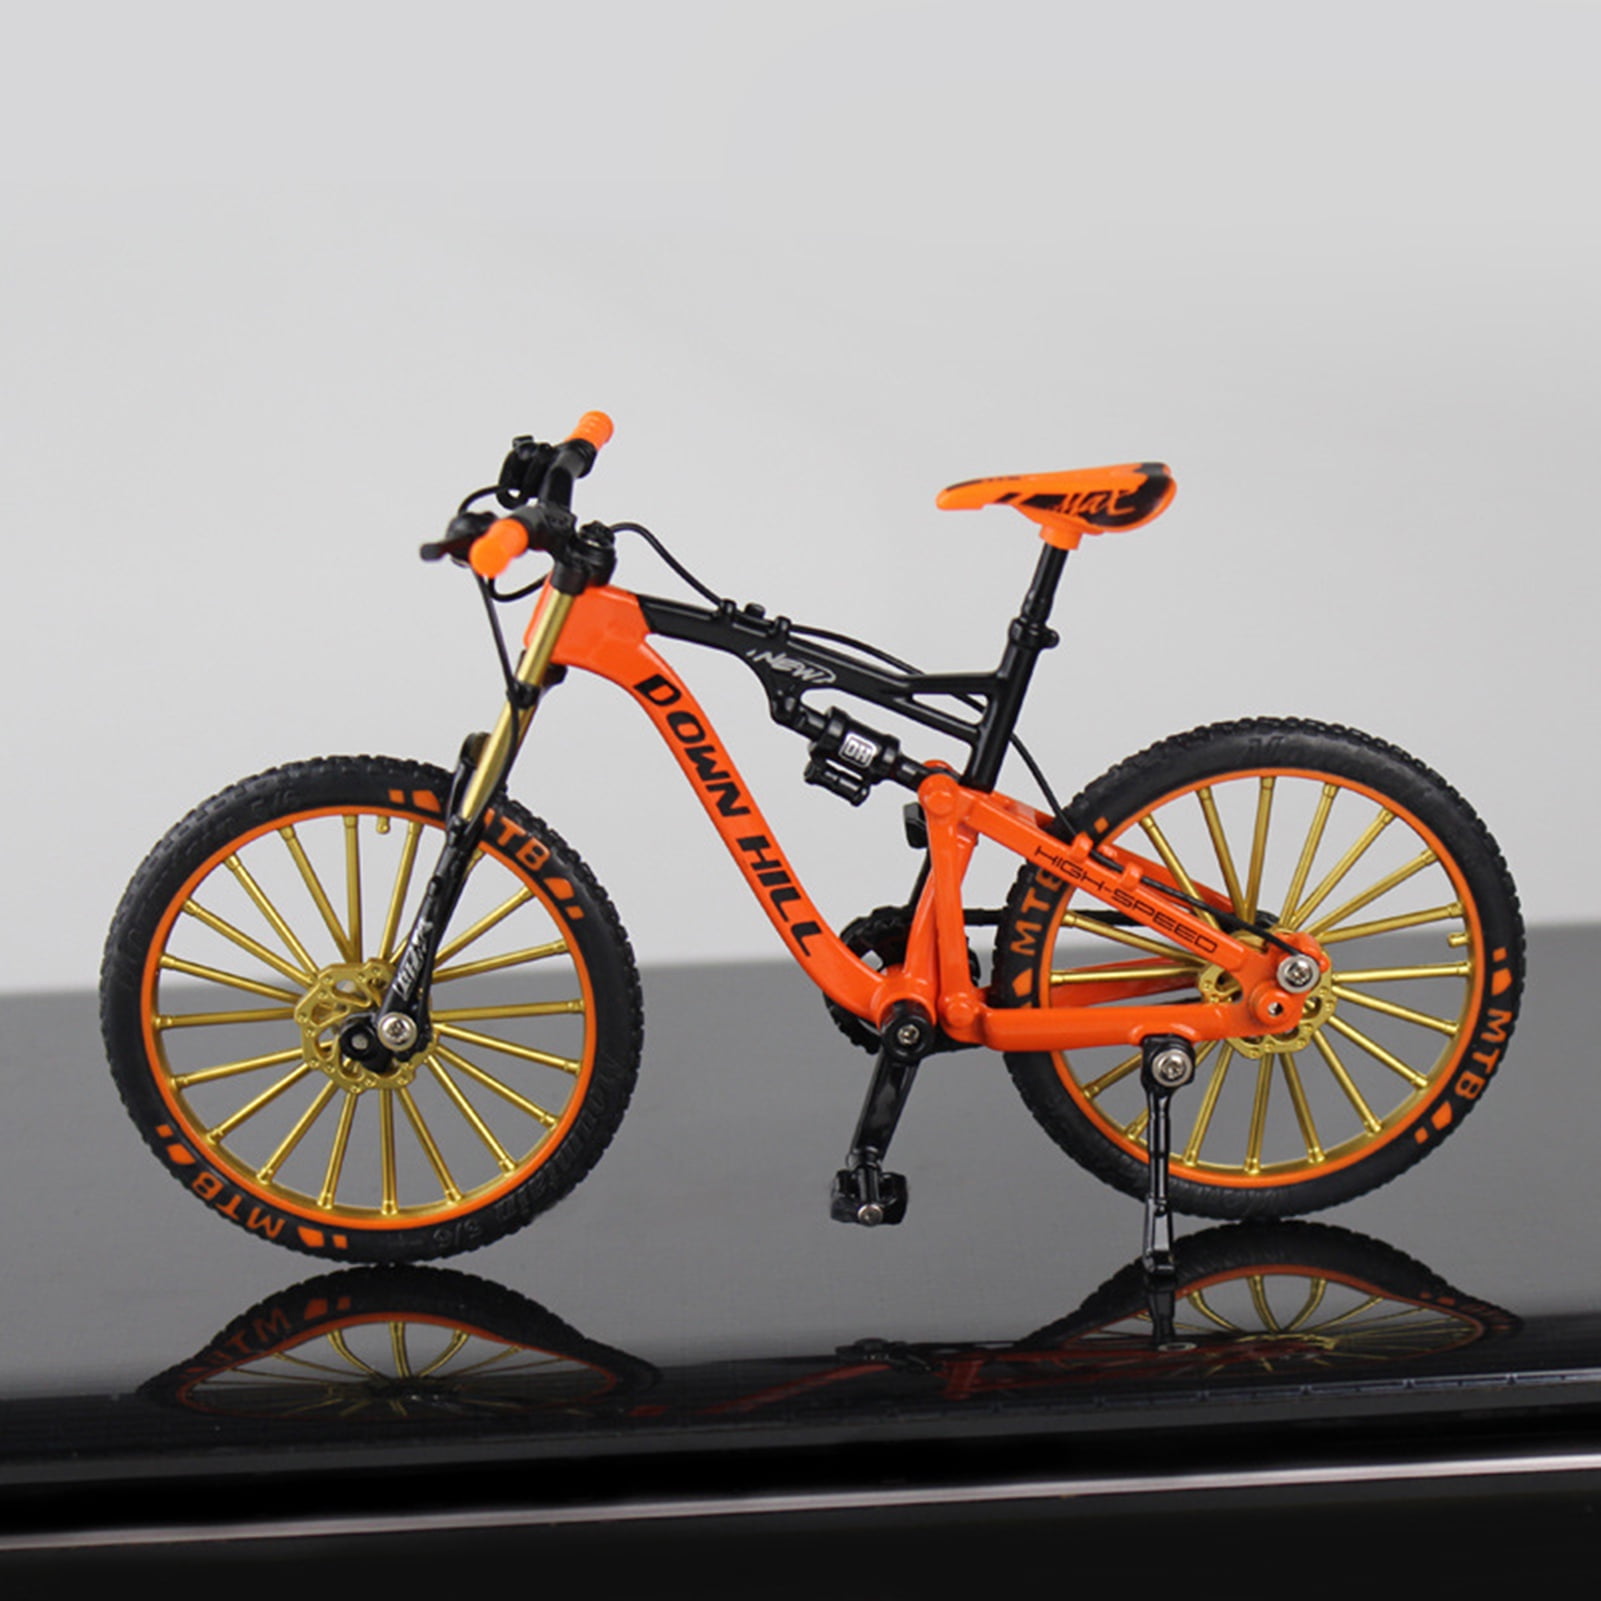 1:10 Scale Diecast Metal Bicycle Model Toys DH Down Hill Extreme Mountain  Bike Replica Collections